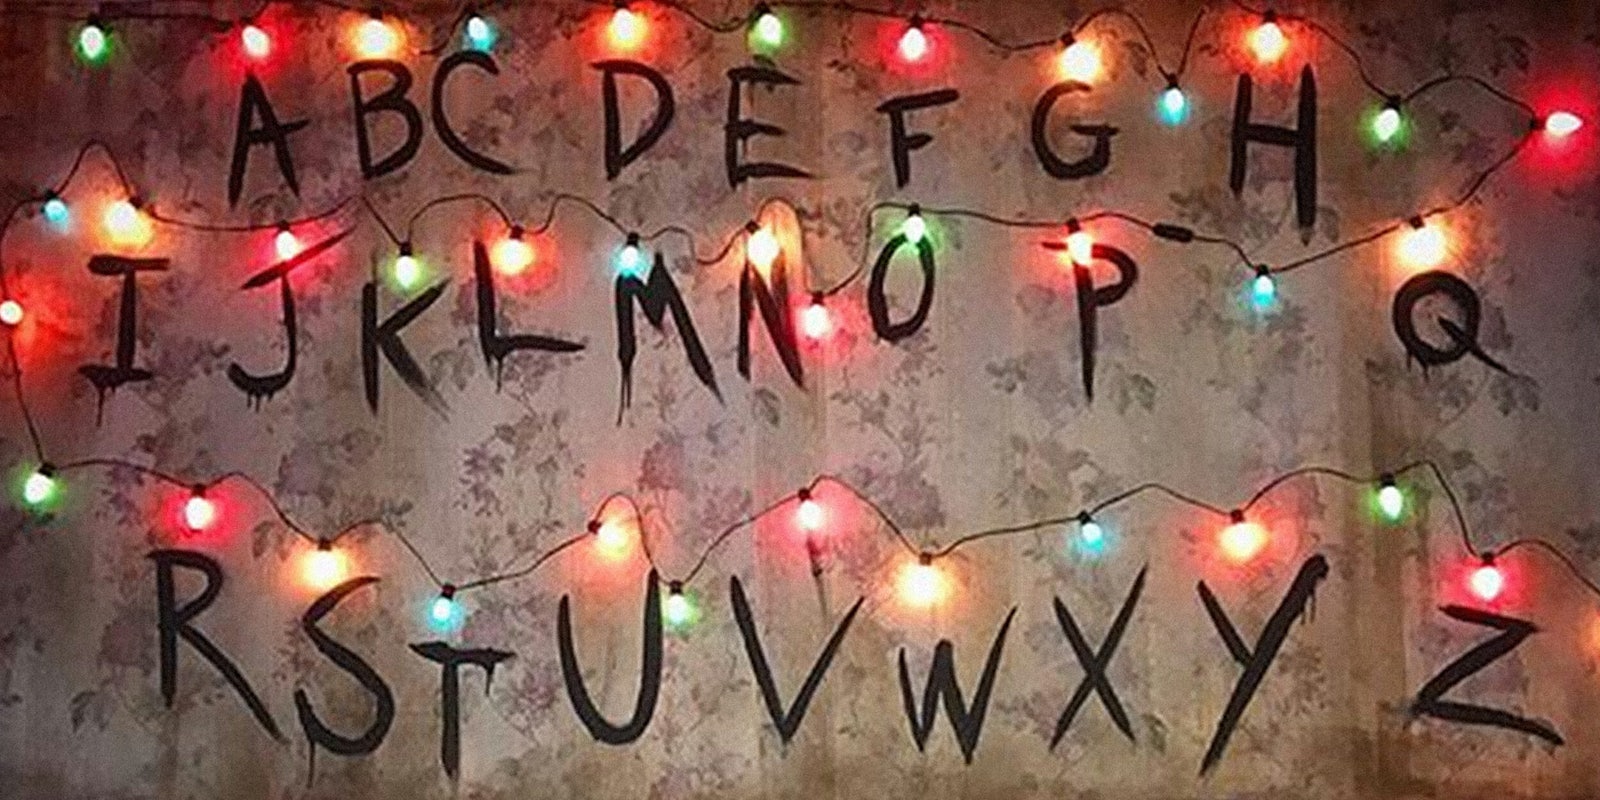 Alphabet with Christmas lights from Stranger Things